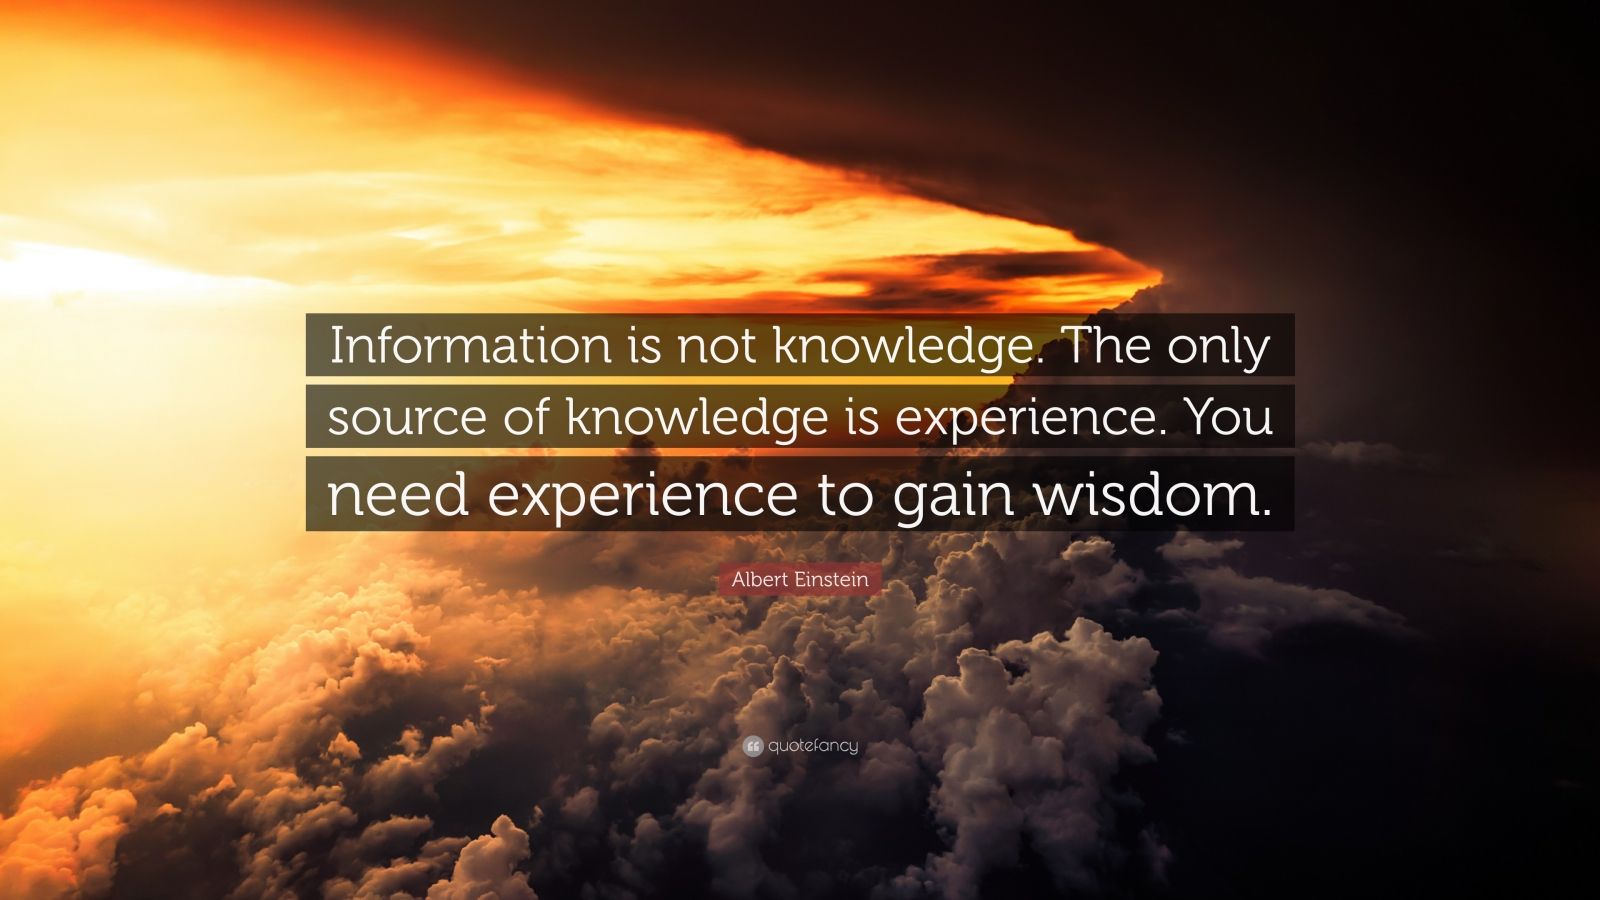 Albert Einstein Quote: “Information is not knowledge. The only source